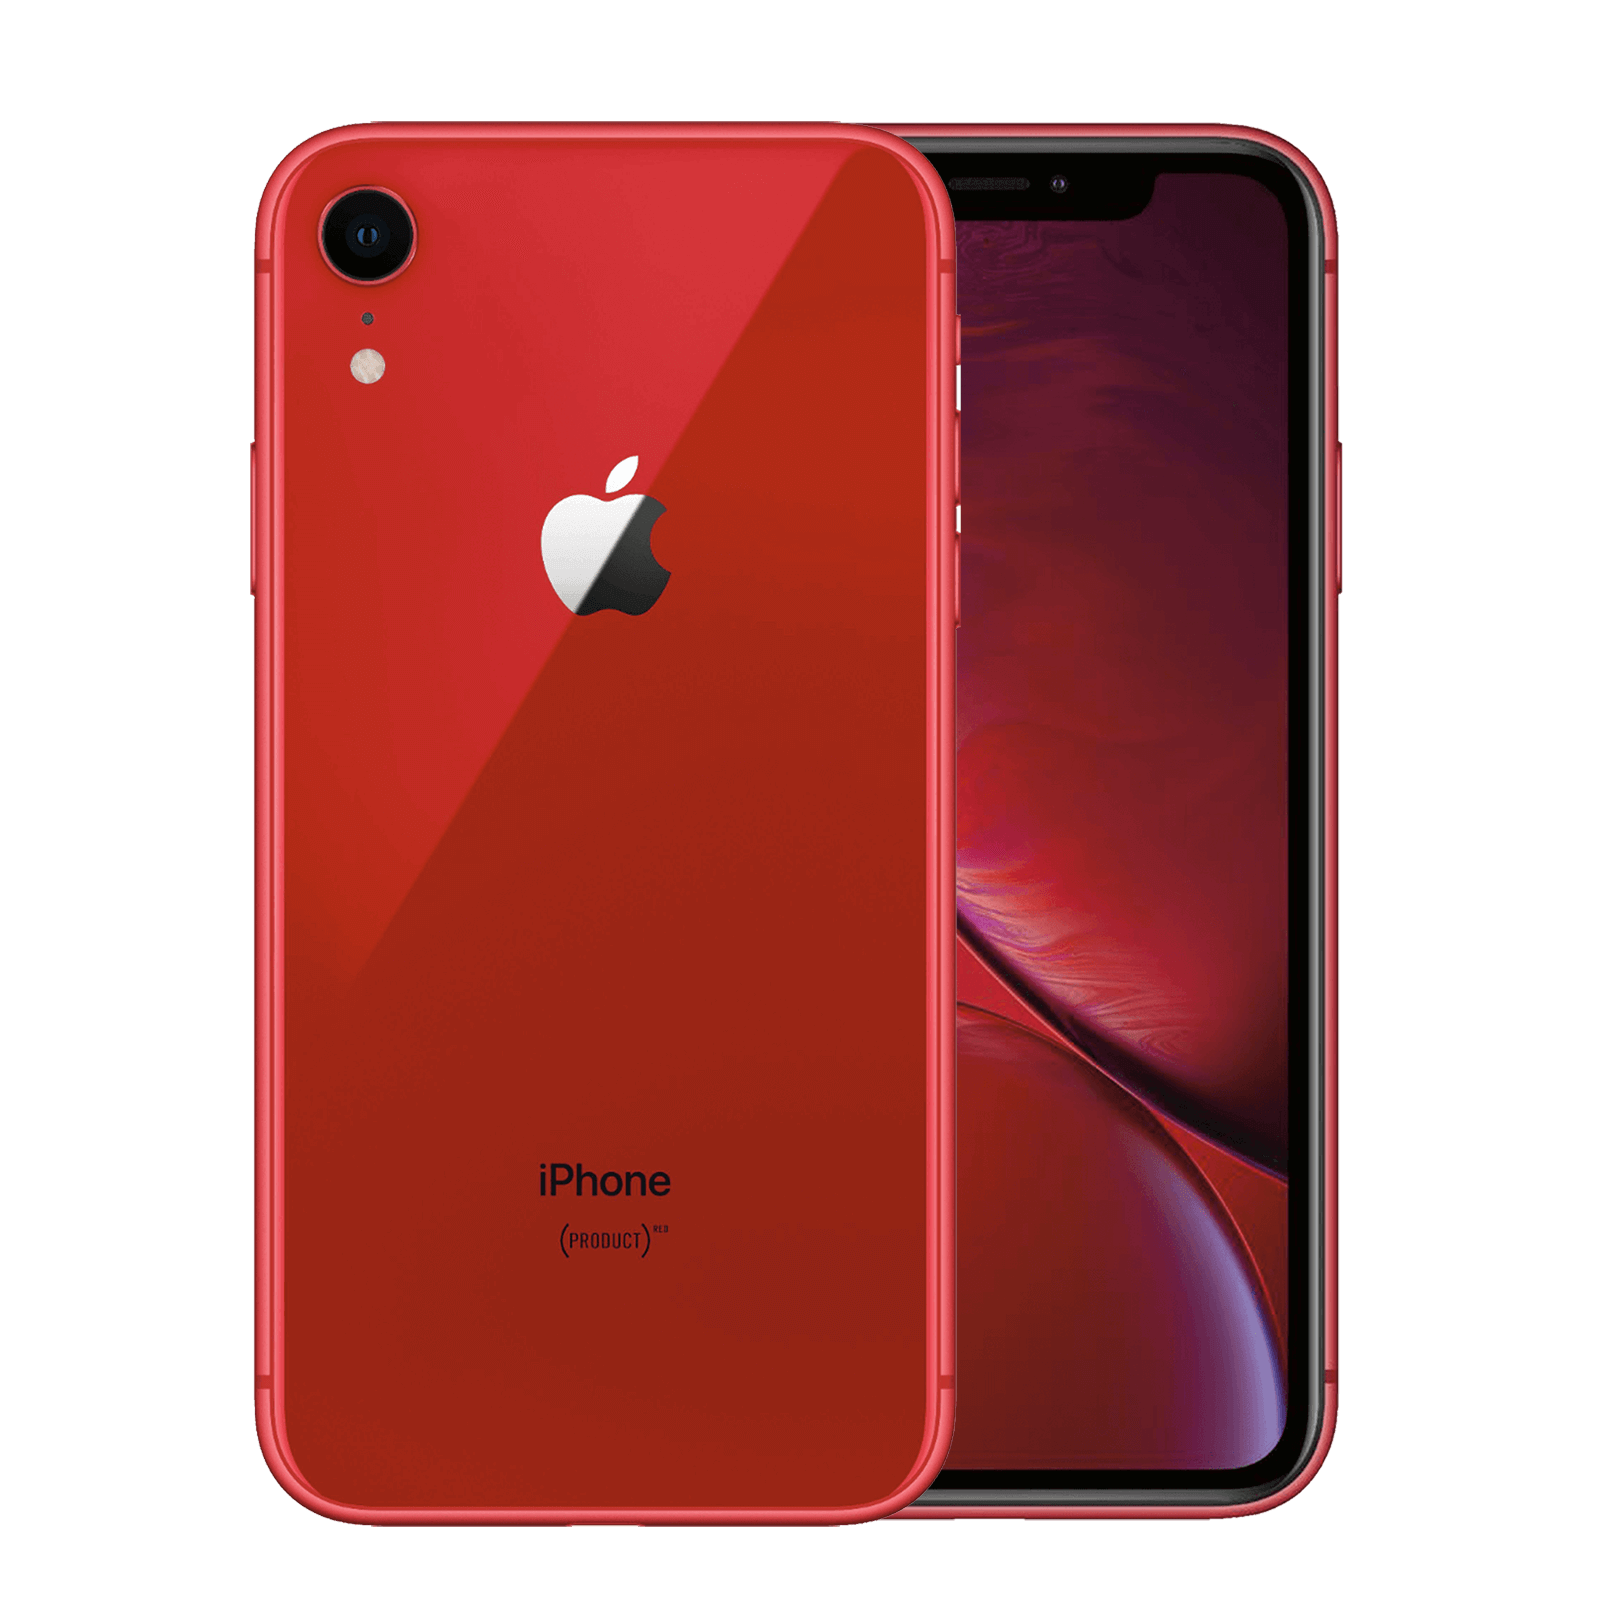 Apple iPhone XR 256GB Product Red Good - Sprint